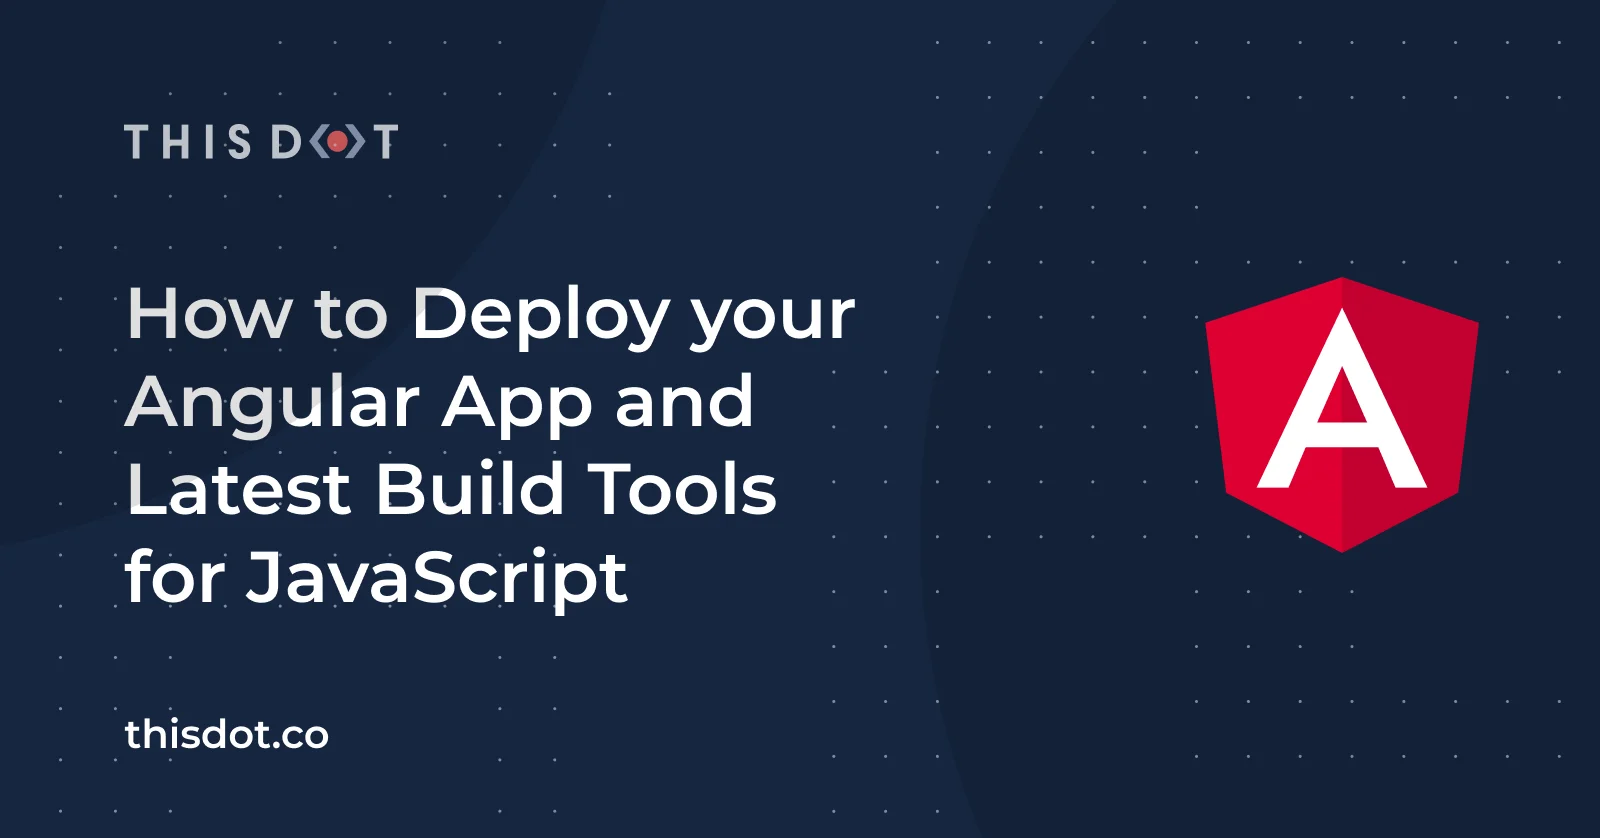 How to Deploy your Angular App and Latest Build Tools for JavaScript cover image